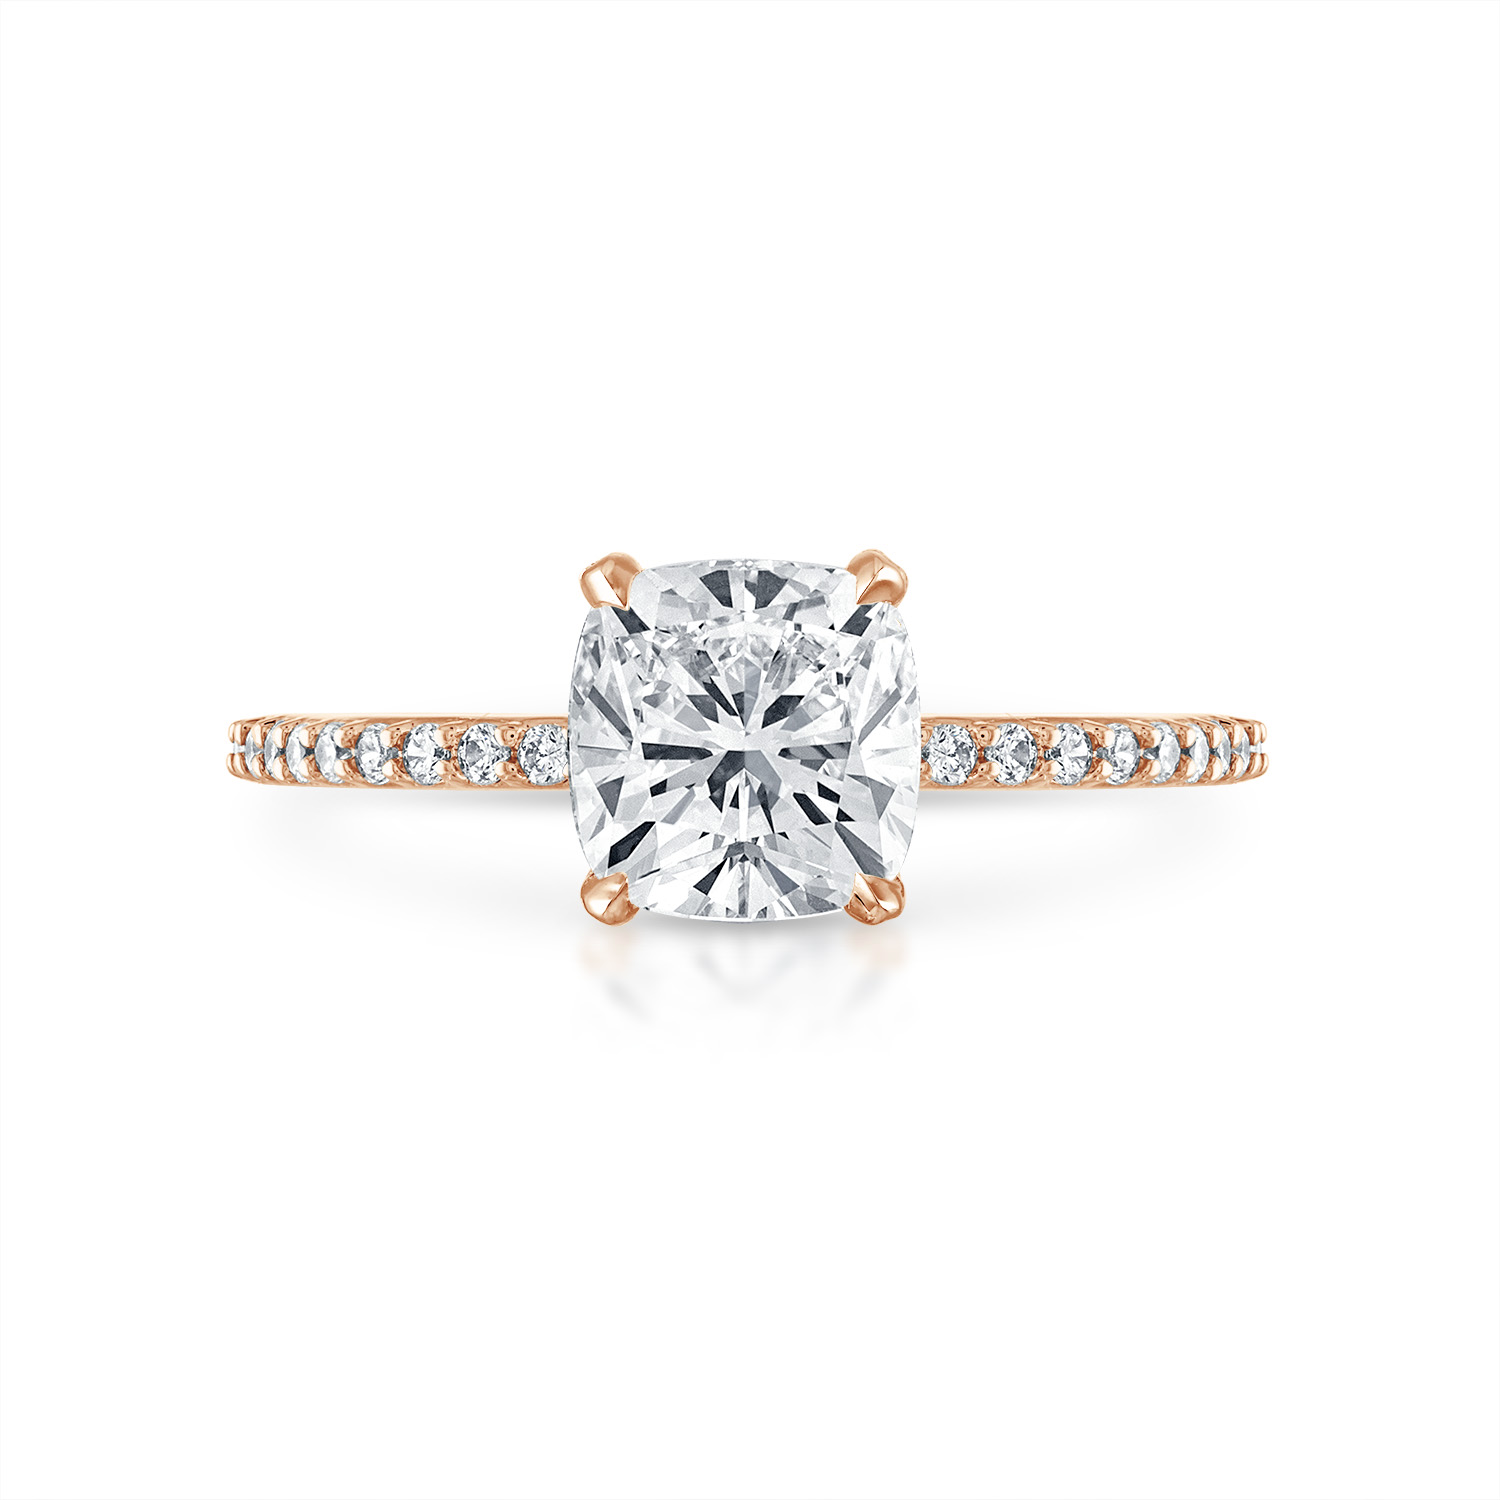 Cushion Pave with Pave Underbezel Engagement Ring in Rose Gold